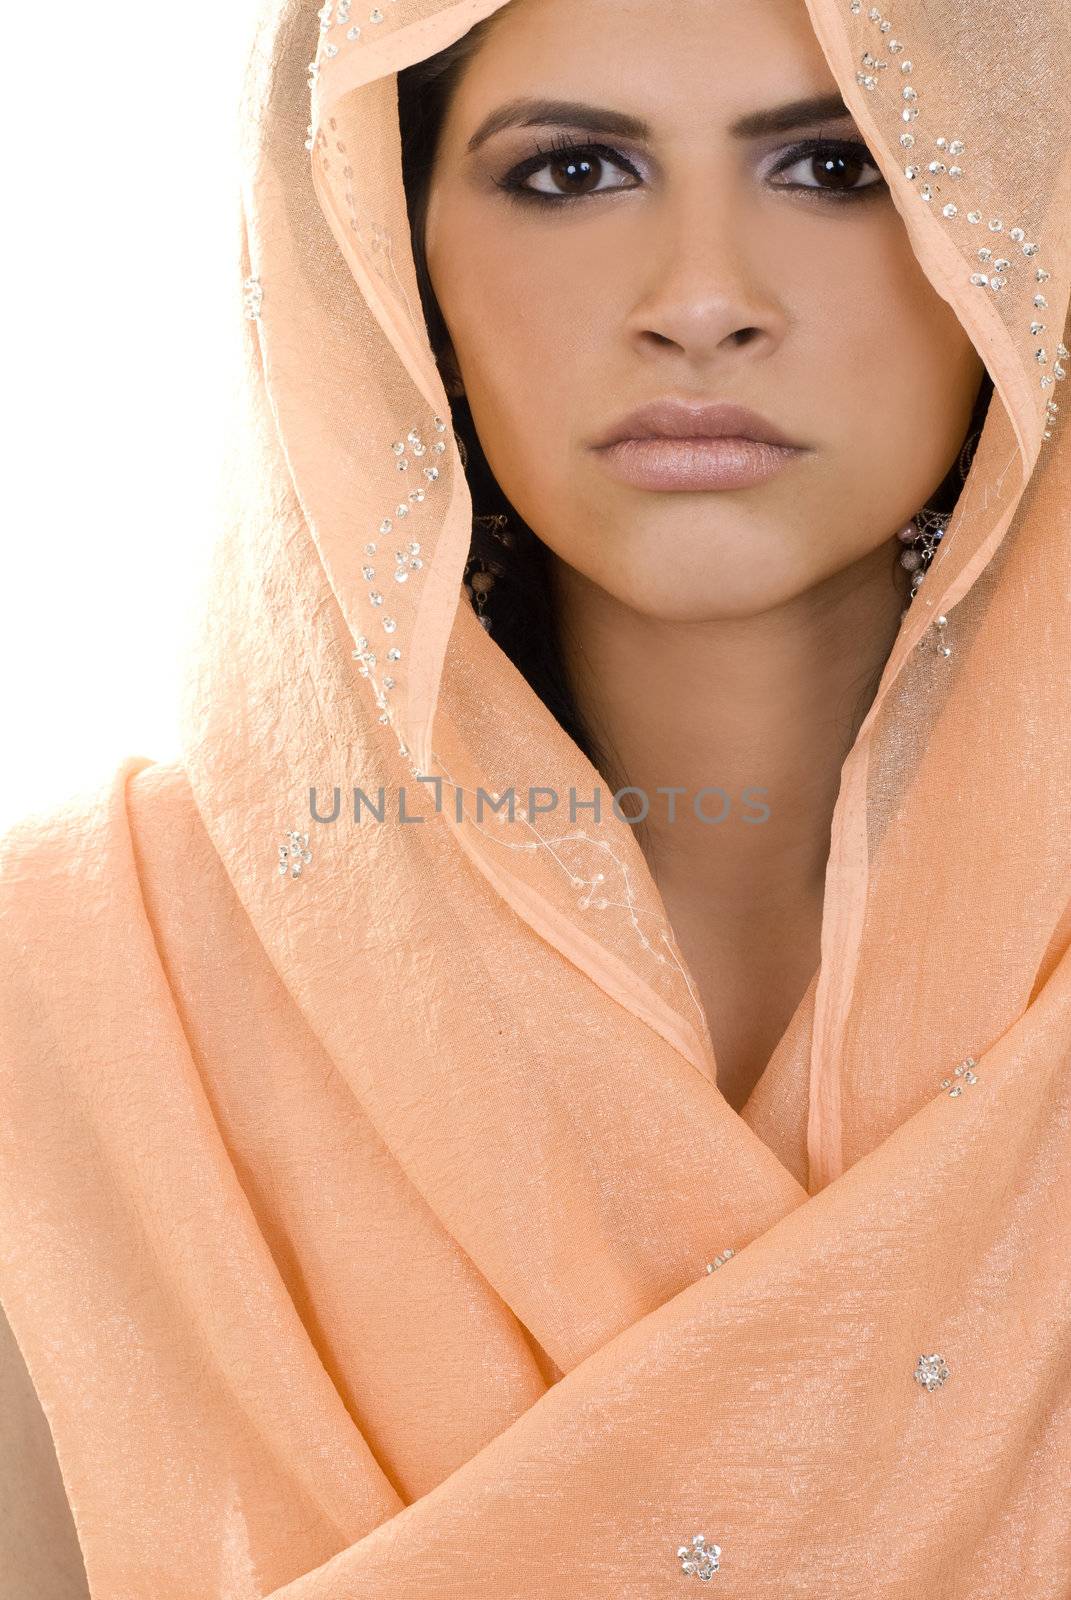 Middle Eastern Woman by eugenef